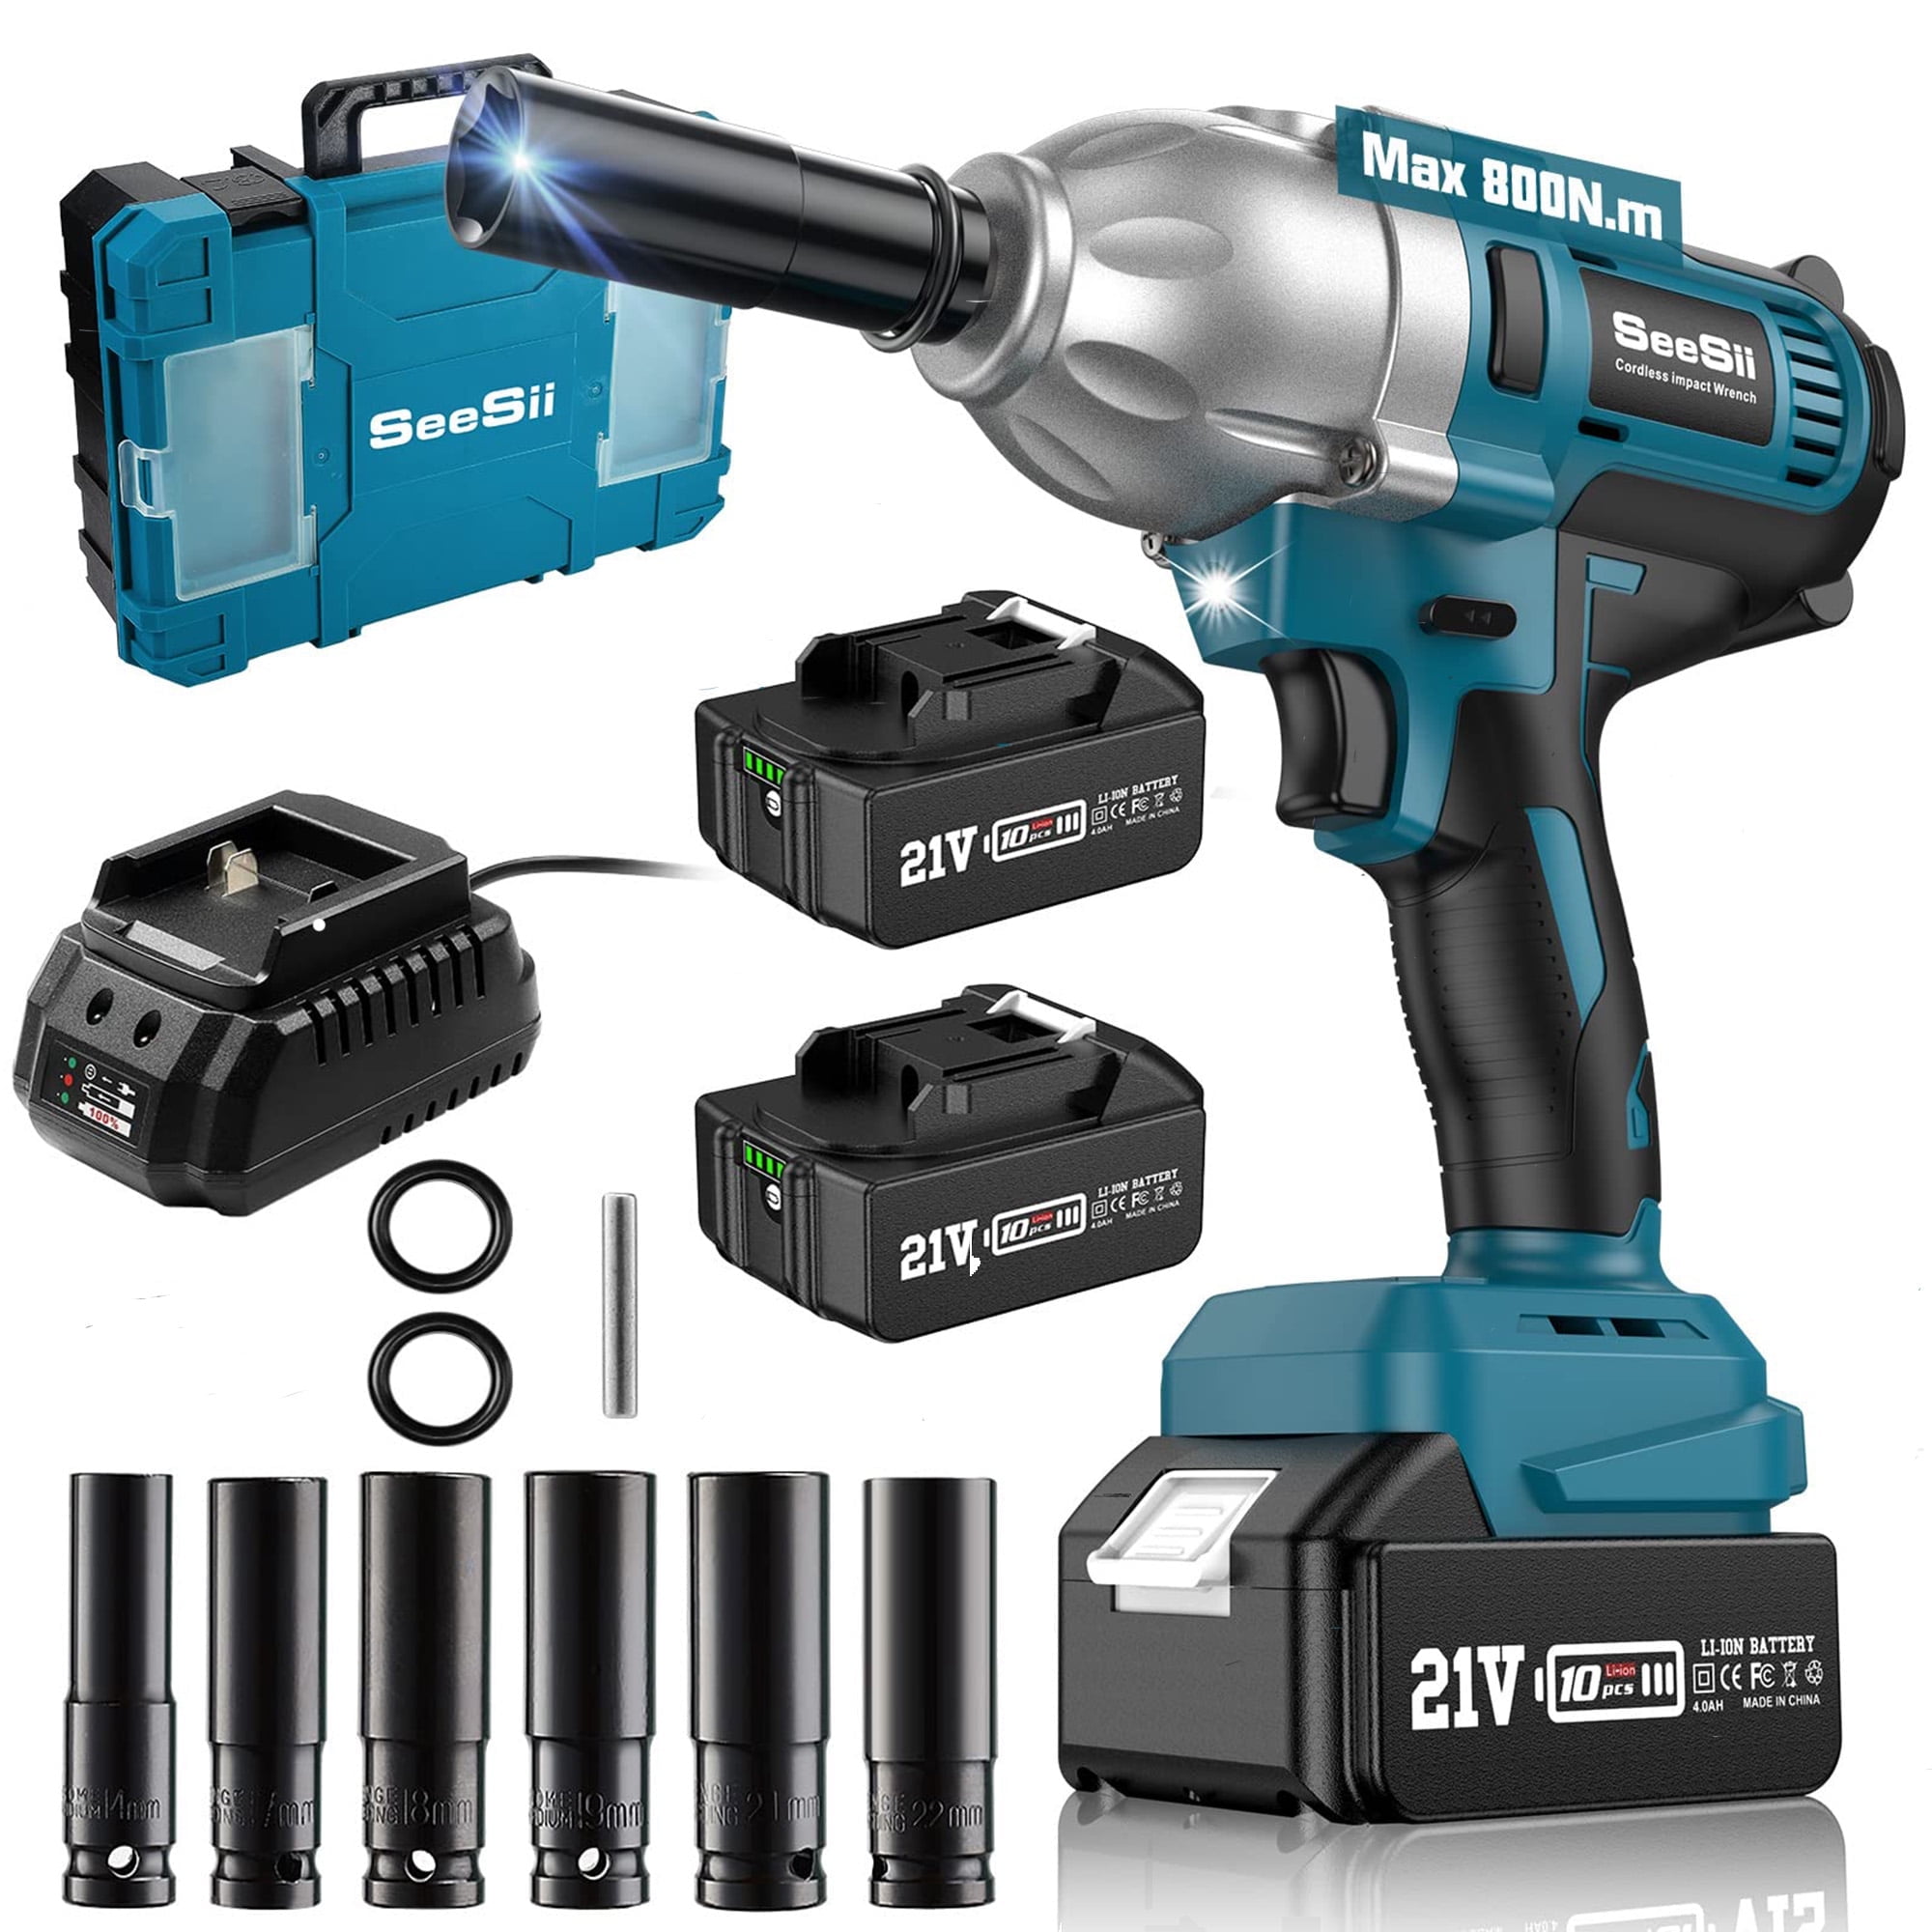 Seesii Cordless Impact Wrench introduction